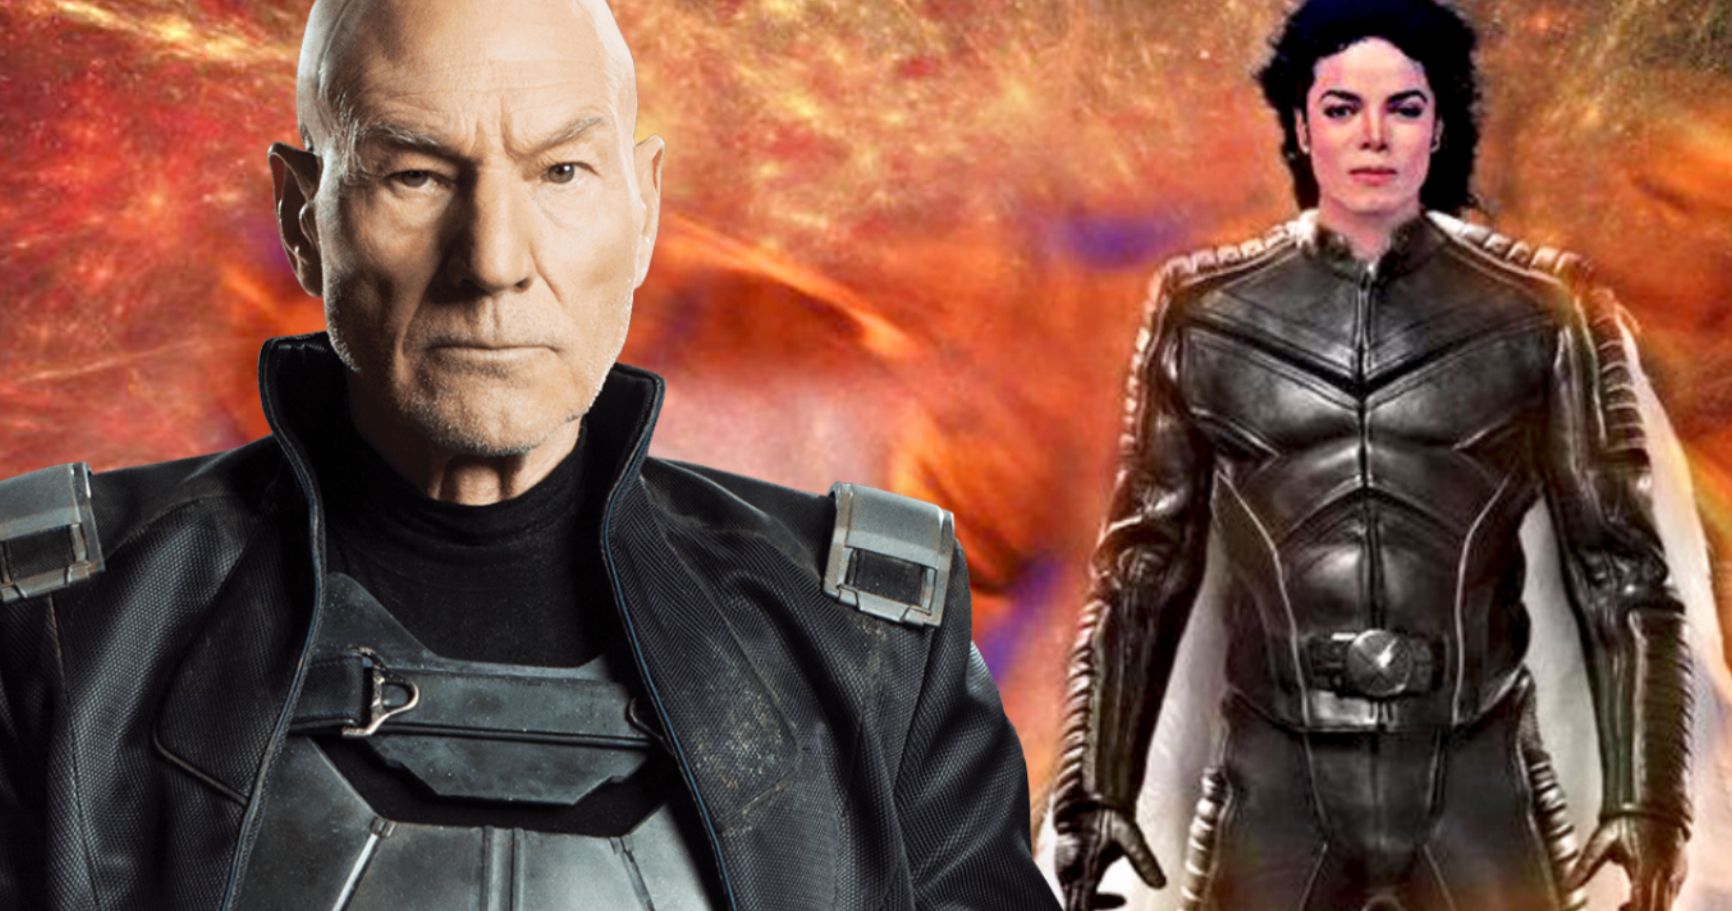 Michael Jackson Wanted to Play Professor X in Whiteface for Original X-Men Movie